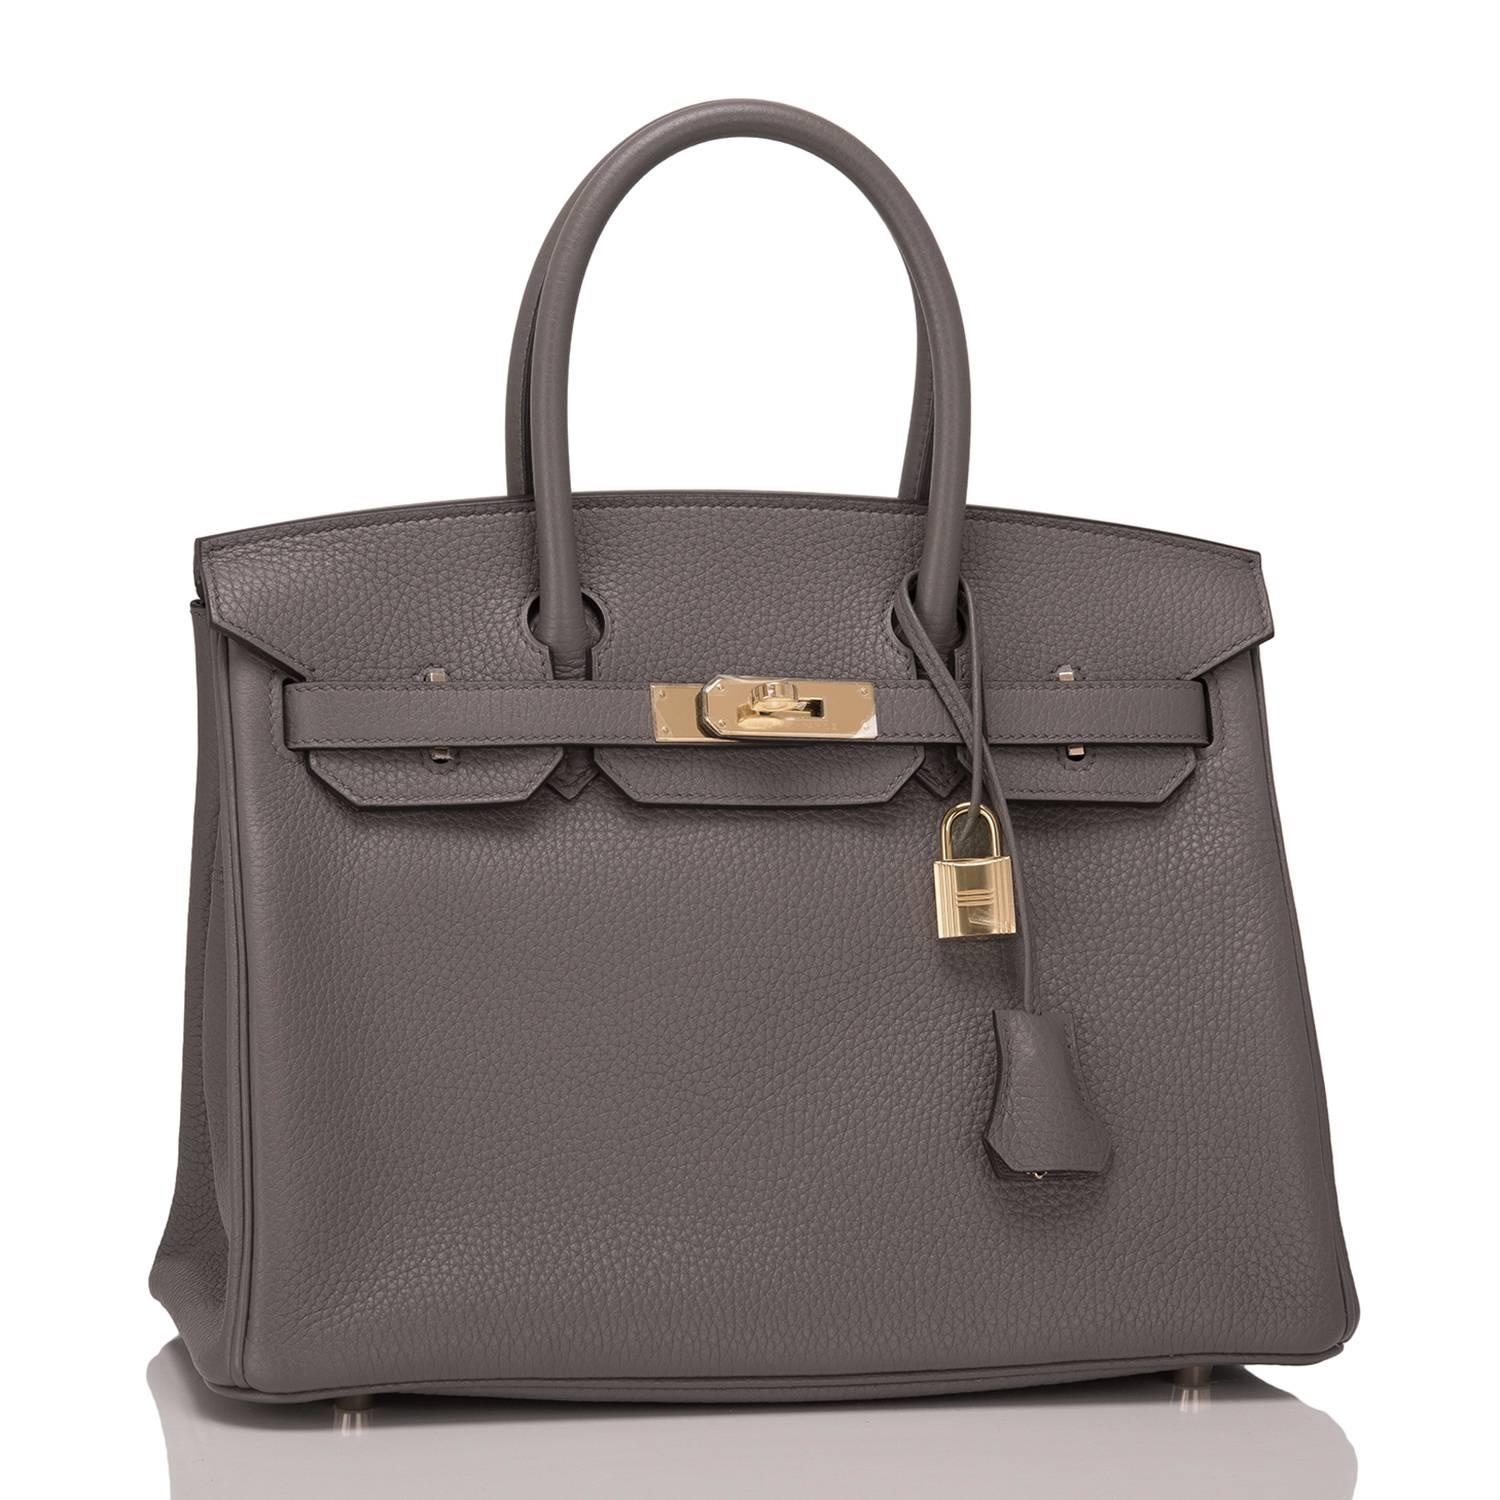 Hermes Etain 30cm of clemence leather with gold hardware.

This Birkin has tonal stitching, a front toggle closure, a clochette with lock and two keys, and double rolled handles.

The interior is lined with Etain chevre and has one zip pocket